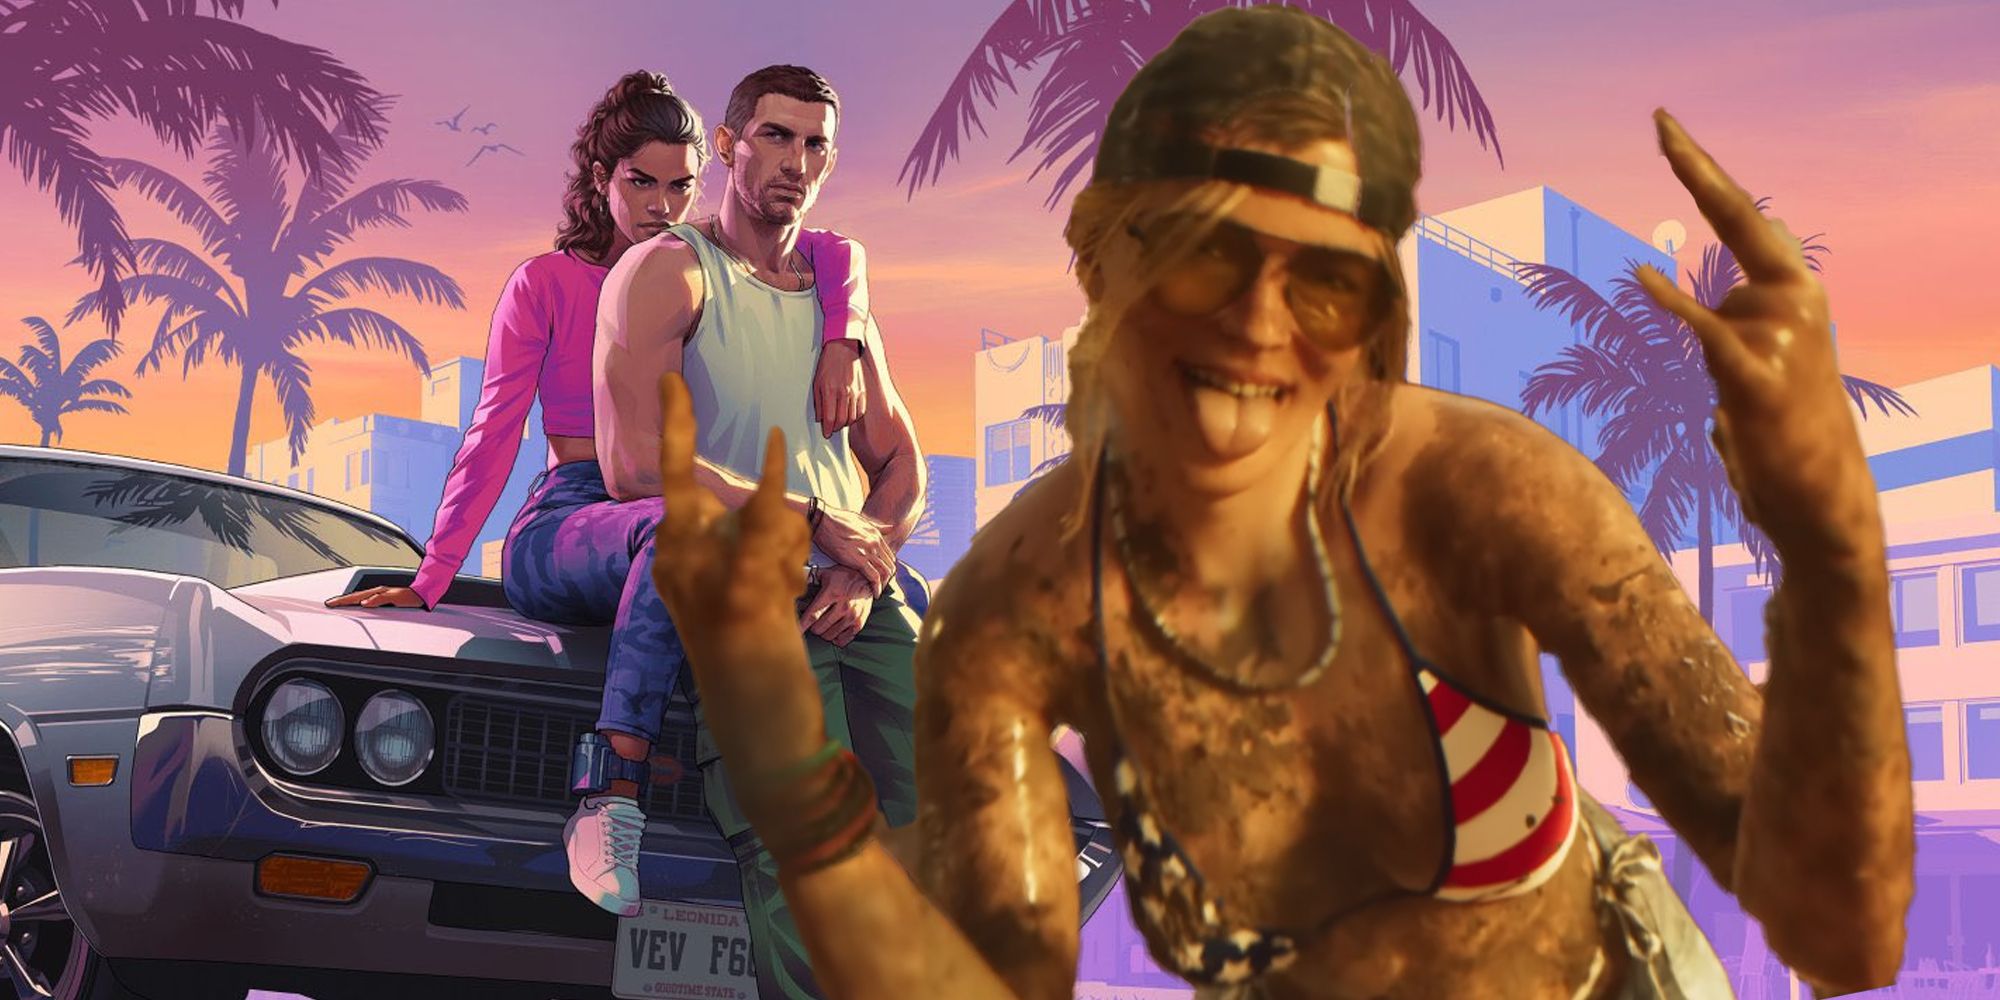 Lucia and her male counterpart with a funny character from the GTA 6 trailer celebrating. 